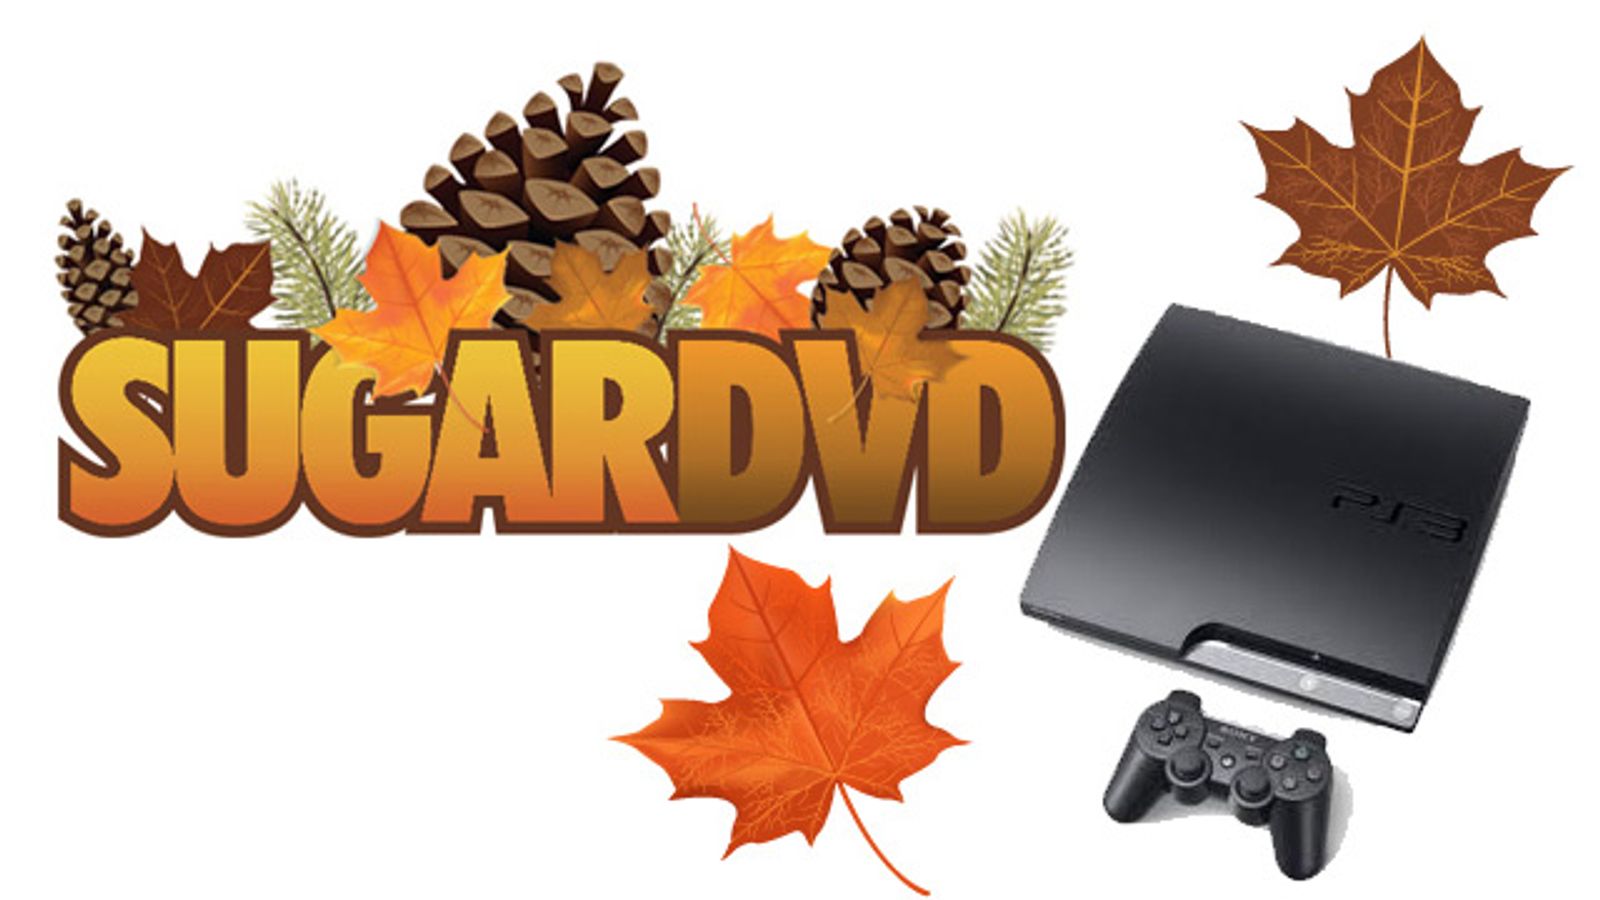 SugarDVD Offers Unlimited TV Streaming on PS3, Google TV